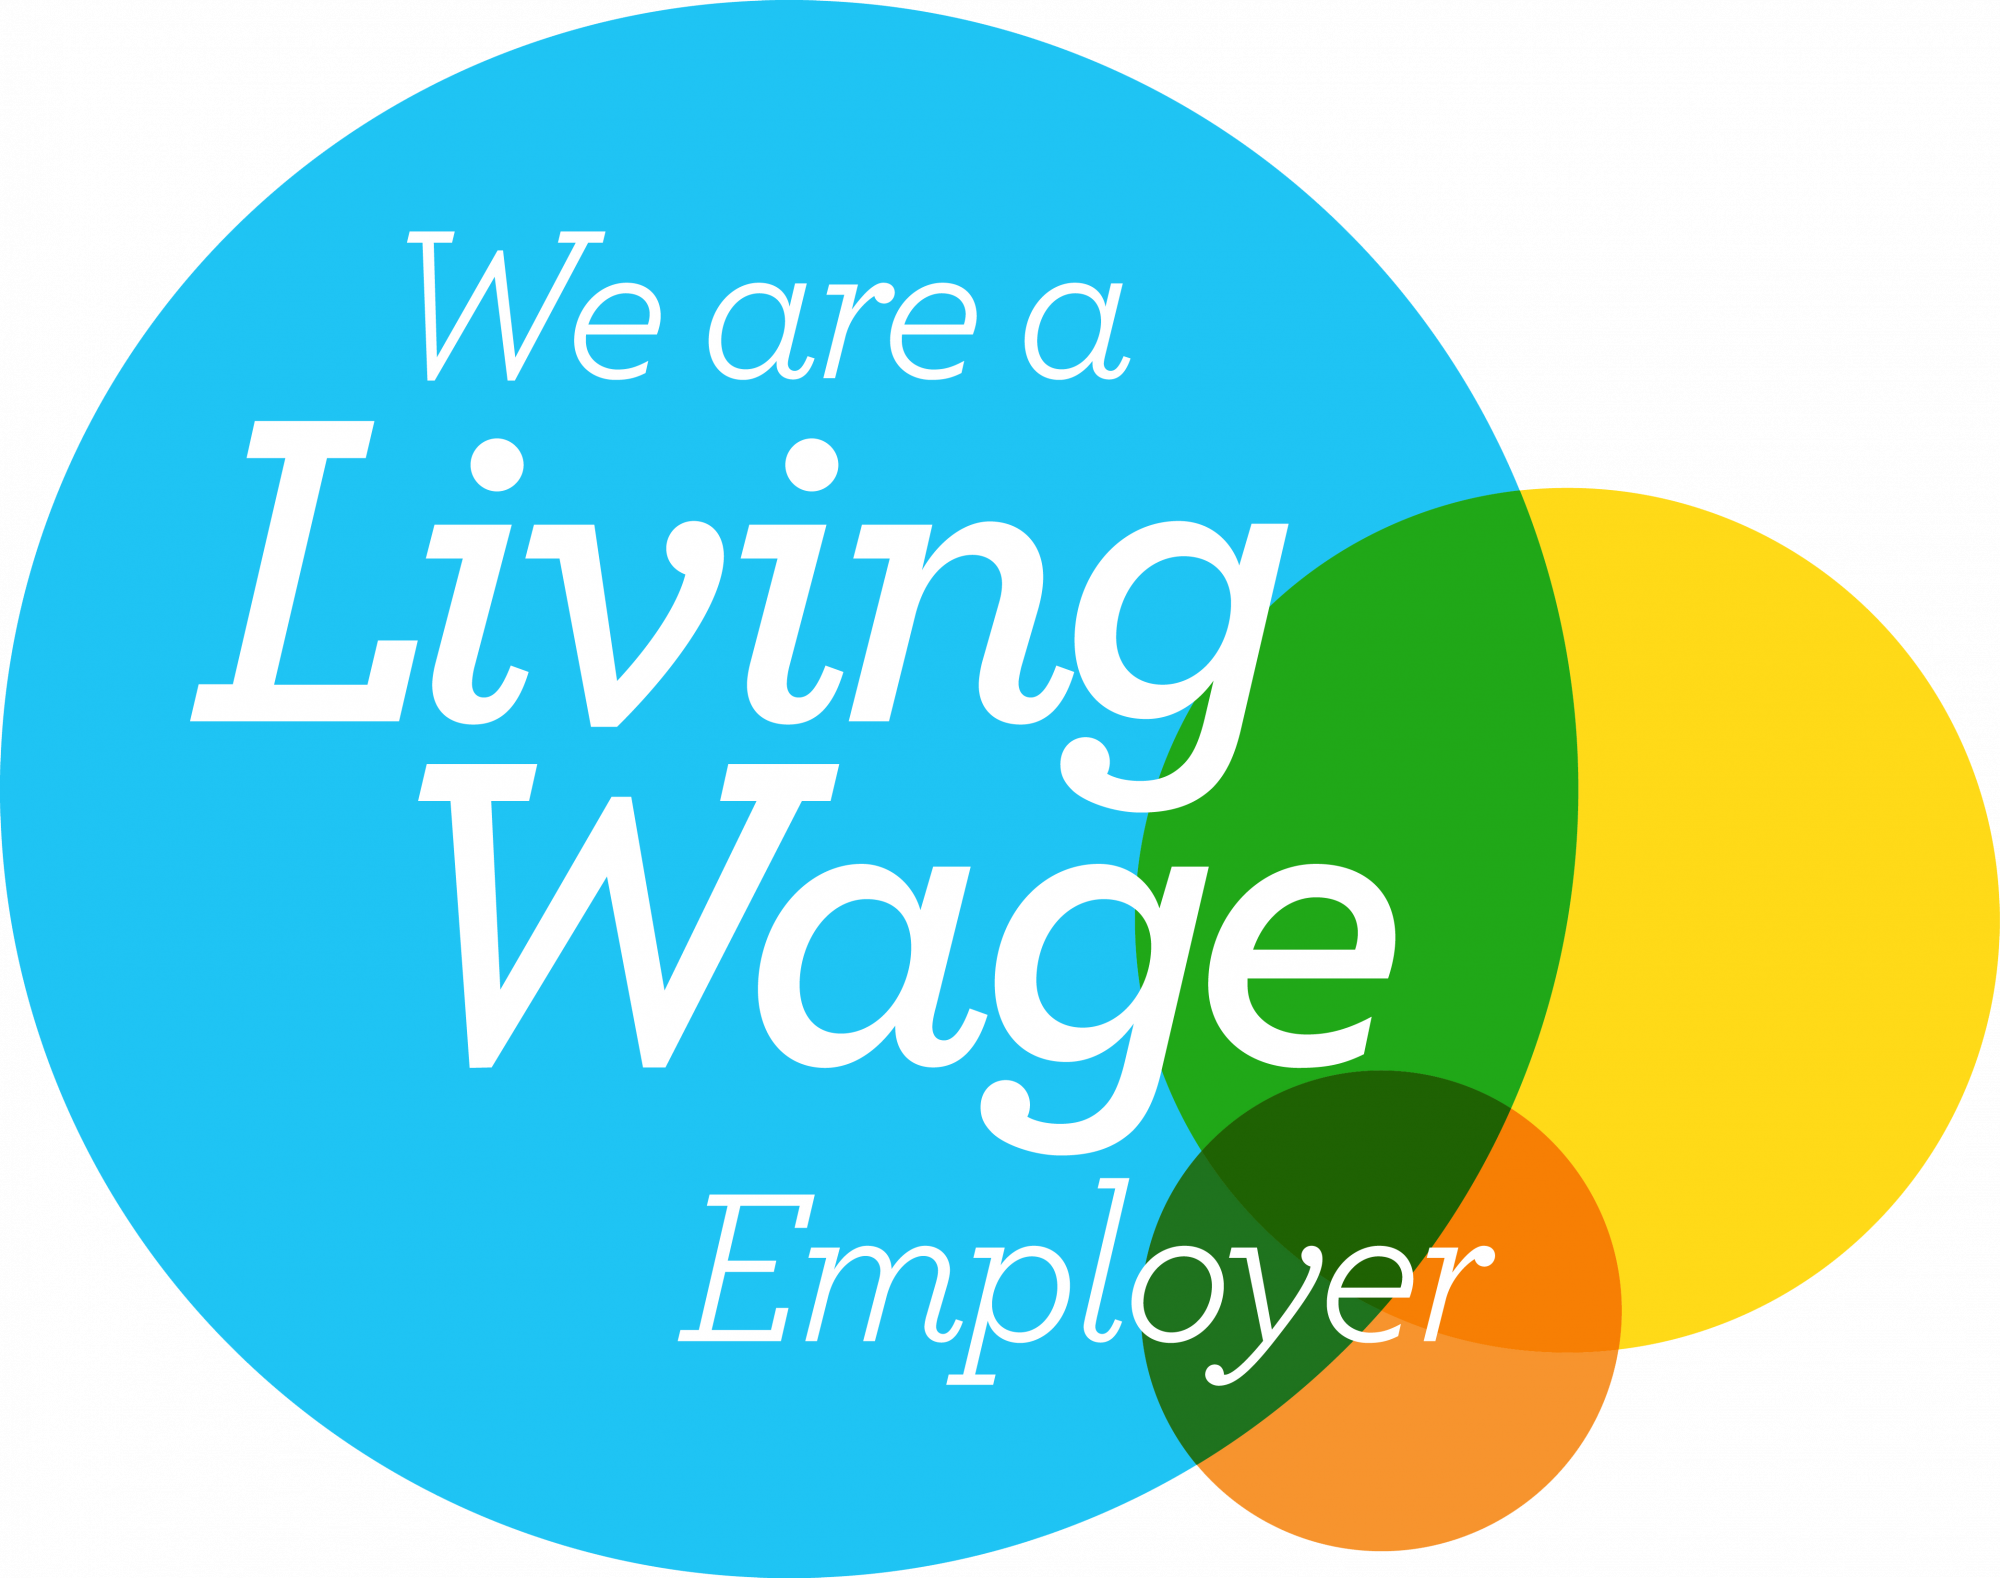 We are a living wage employer! The logo is a blue circle with white font, there are smaller yellow and orange circles where they overlap the blue they have turned green.